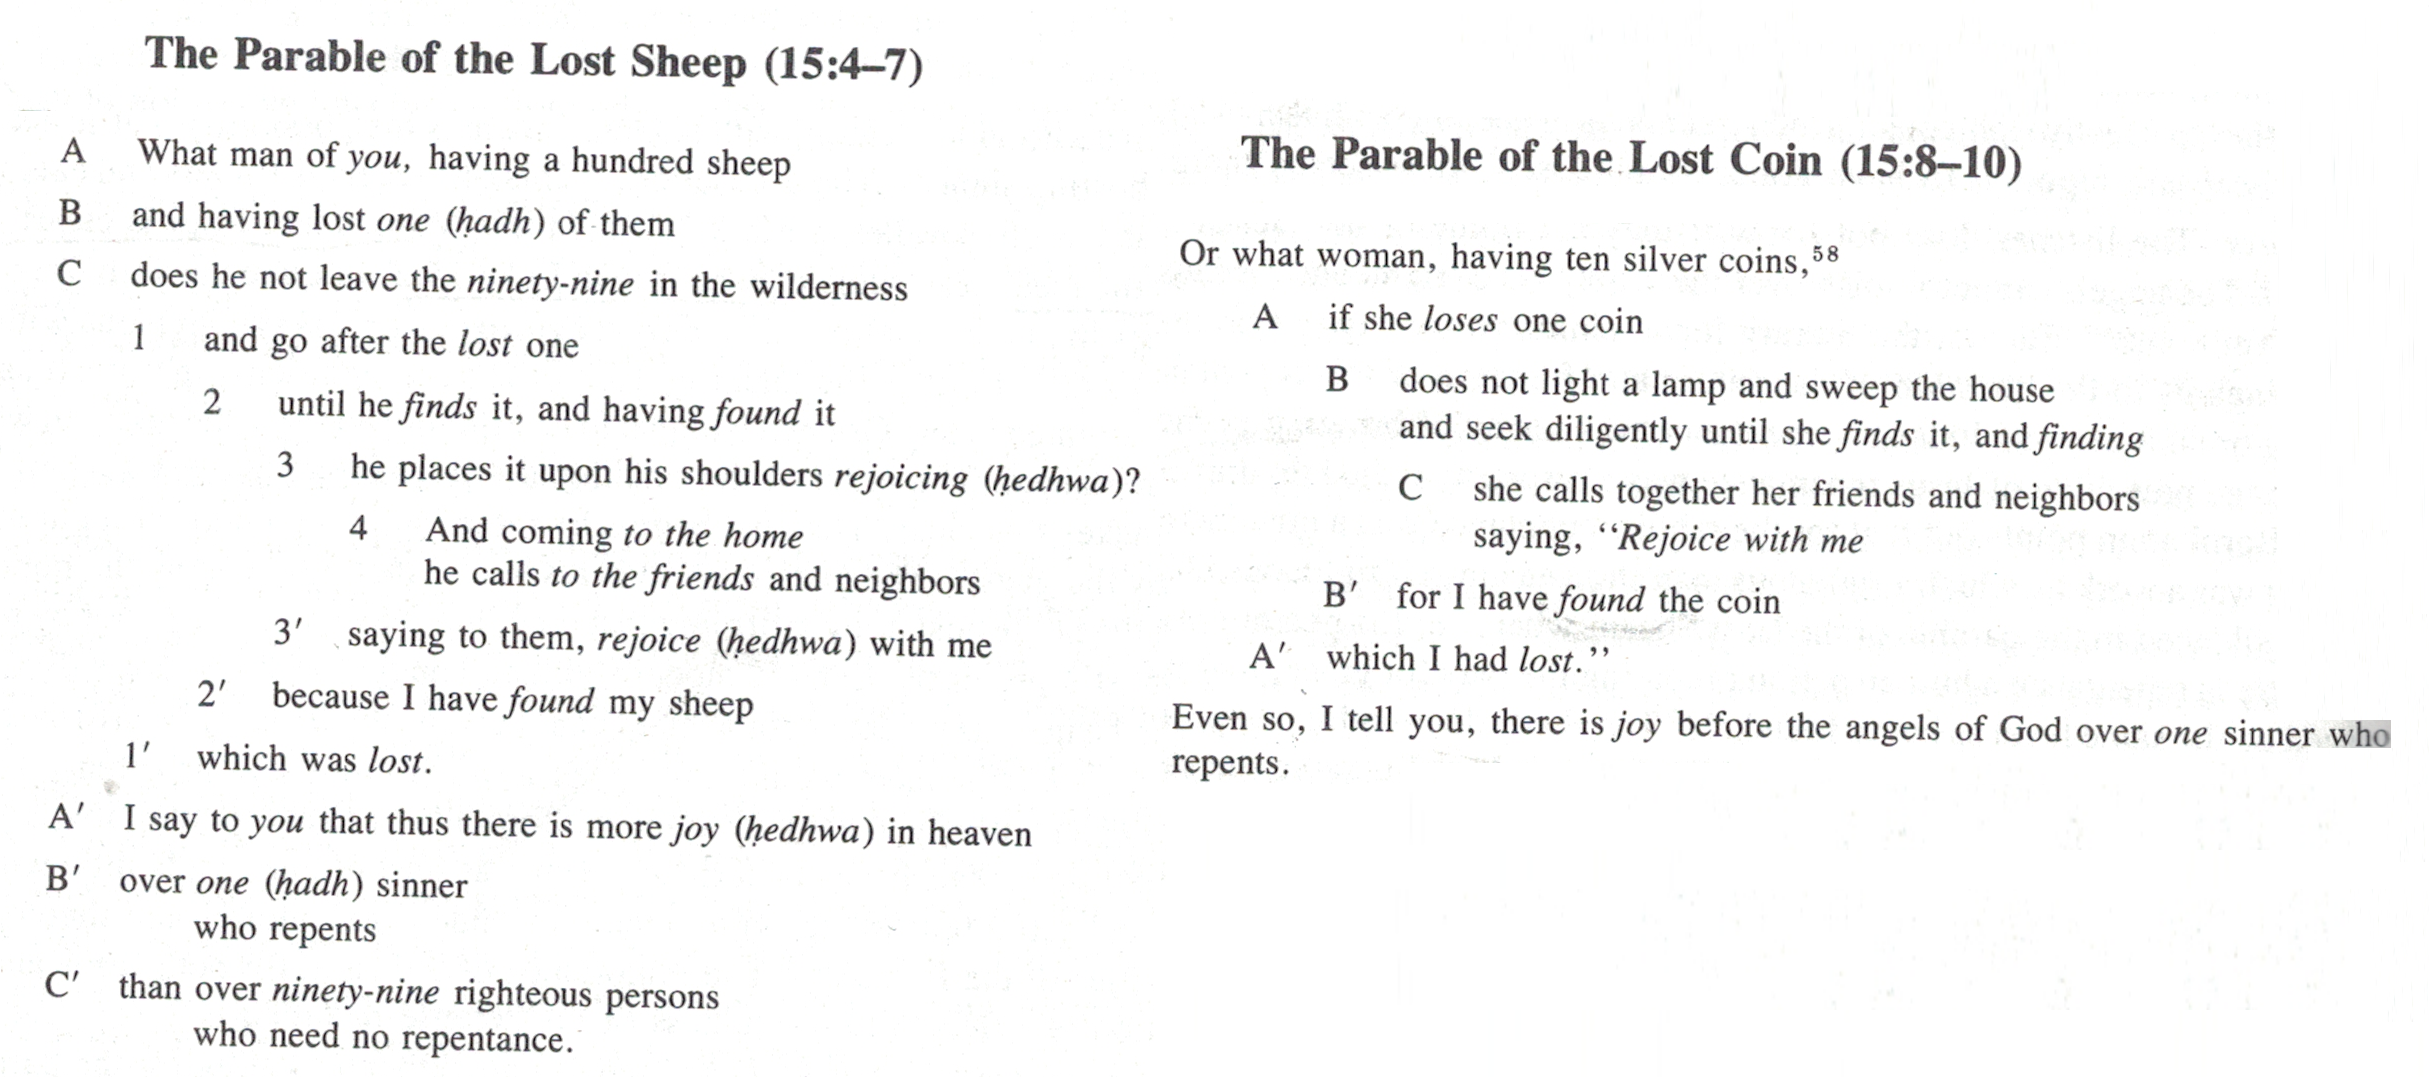 text of lost sheep and lost coin parables showing inversion of concepts as ancient Hebrew poetry